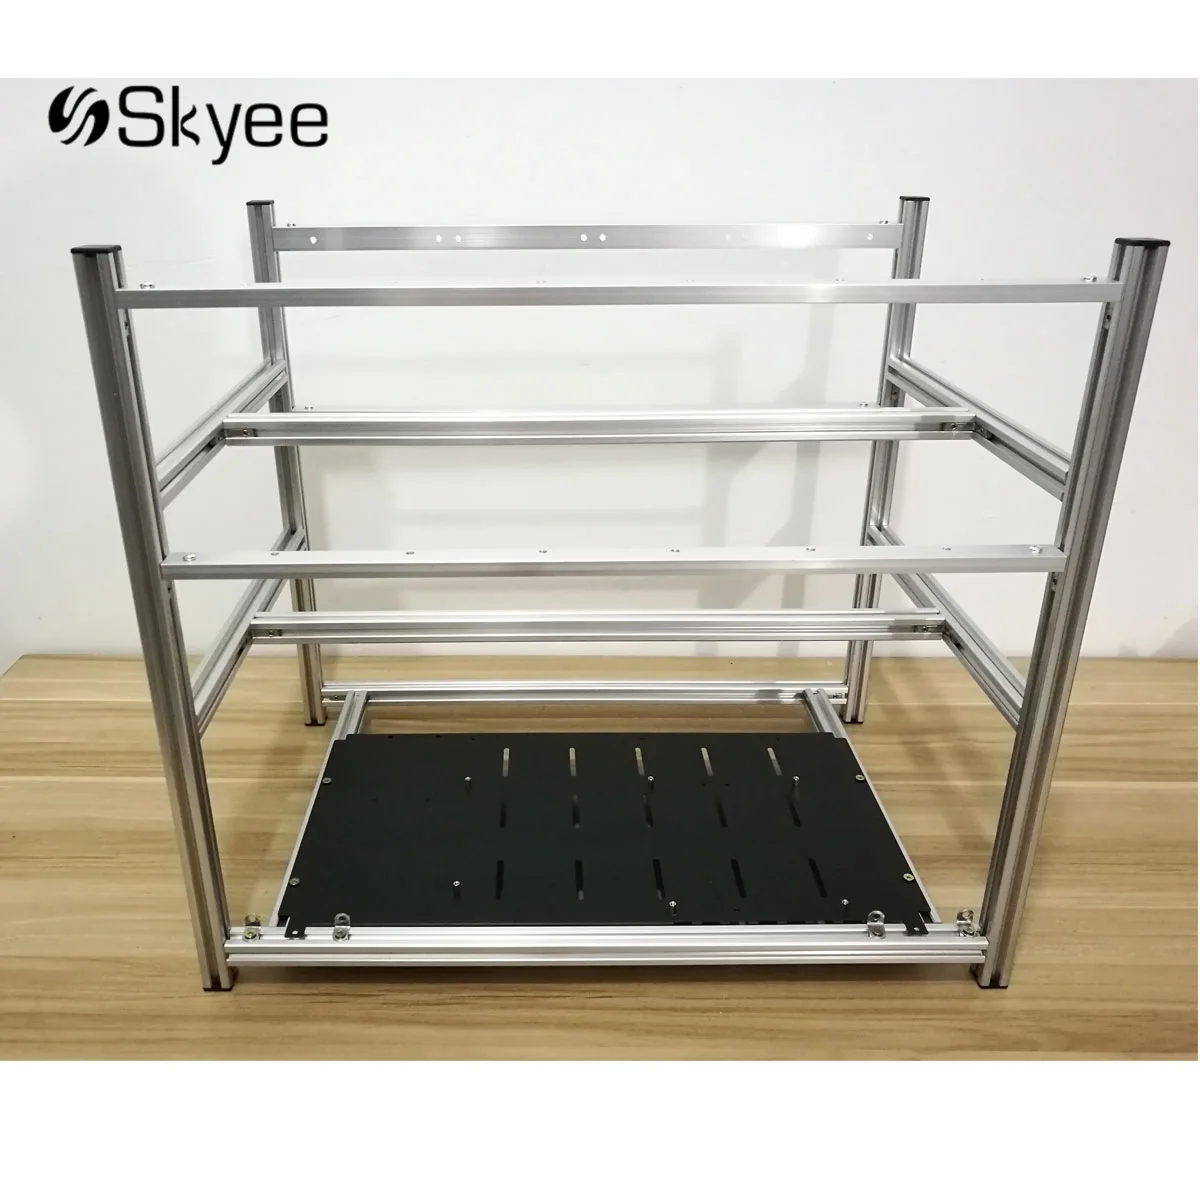 S SKYEE Open Air Mining Rig Non-Stackable Frame Case for 12 GPU ETH BTC Ethereum New Computer Mining Frame Server Chassis